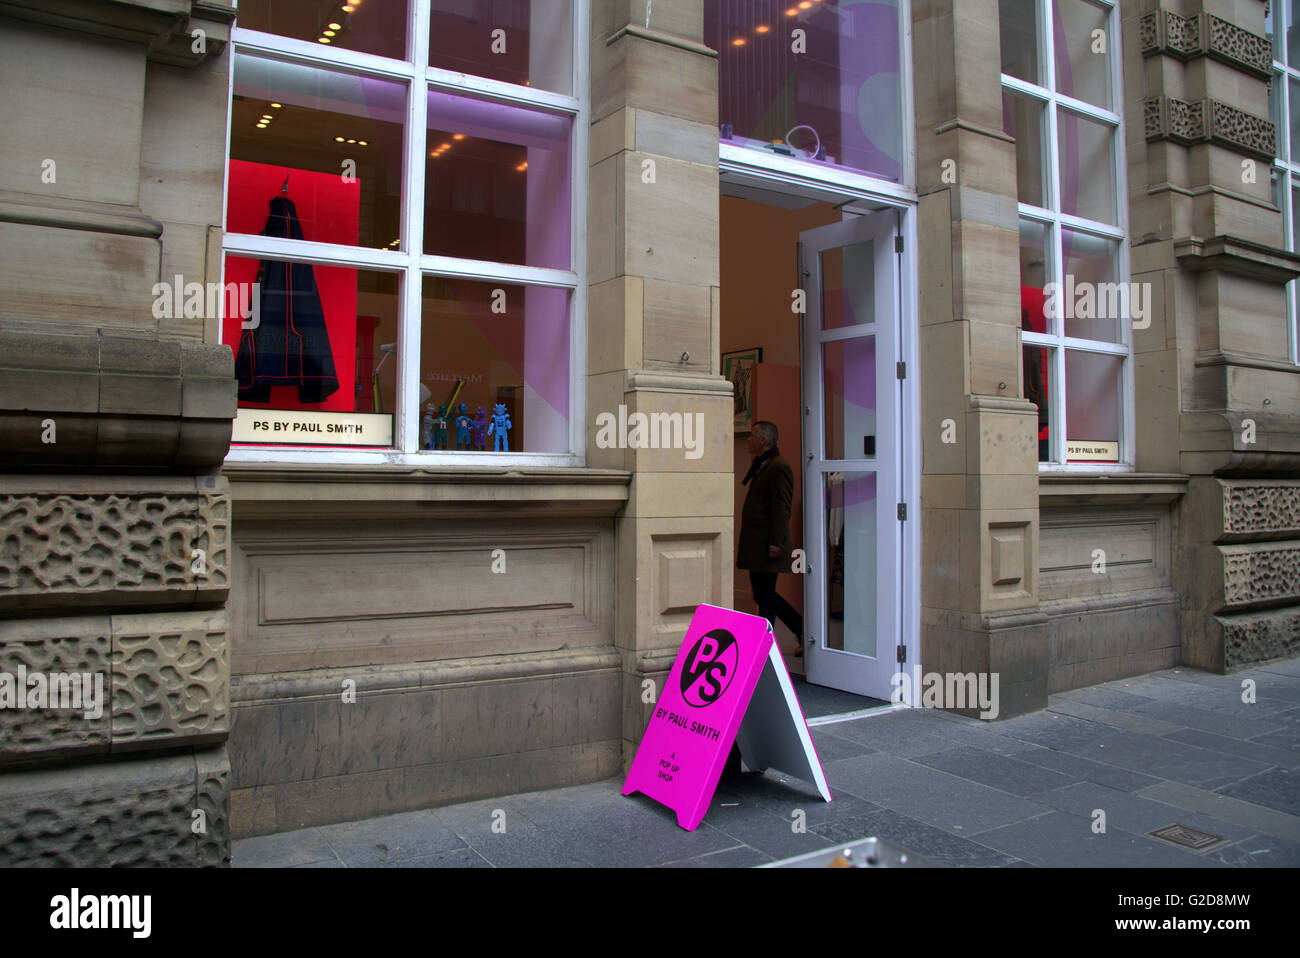 Glasgow, UK. 28th May, 2016.     The  iconic British designer Paul Smith has opened   his first ever  Scottish store, a pop-up concept   shop,whuch will open for a six month run. His   special feeling for the city was recently highlighted   in  his ‘Hello, my name is Paul Smith’ exhibition that    ran in 'The Lighthouse' design centre earlier this   year.     Credit:  gerard ferry/Alamy Live News Stock Photo